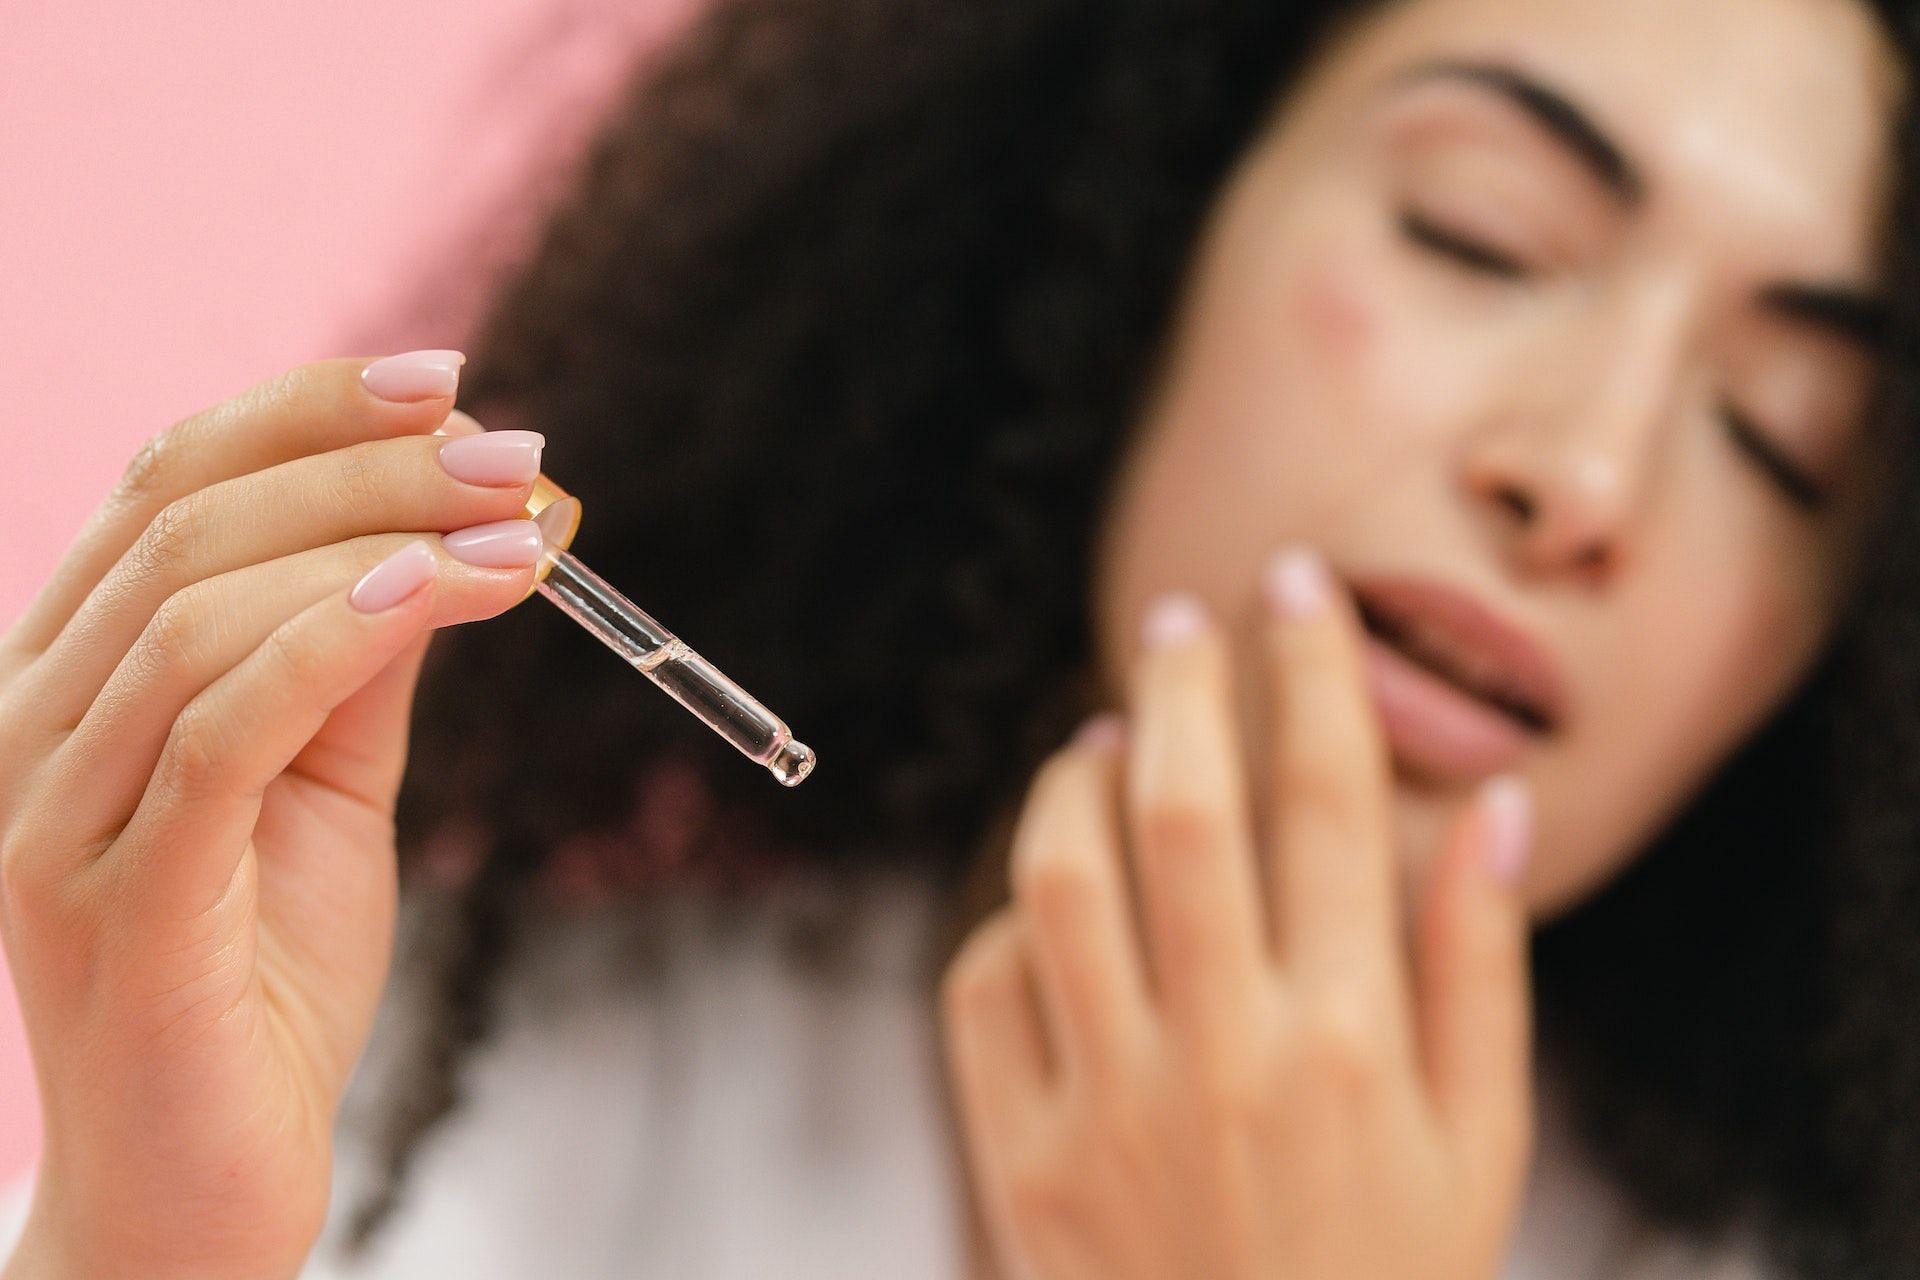 Always do a patch test before using any new product on your skin. (Photo via Pexels/SHVETS production)